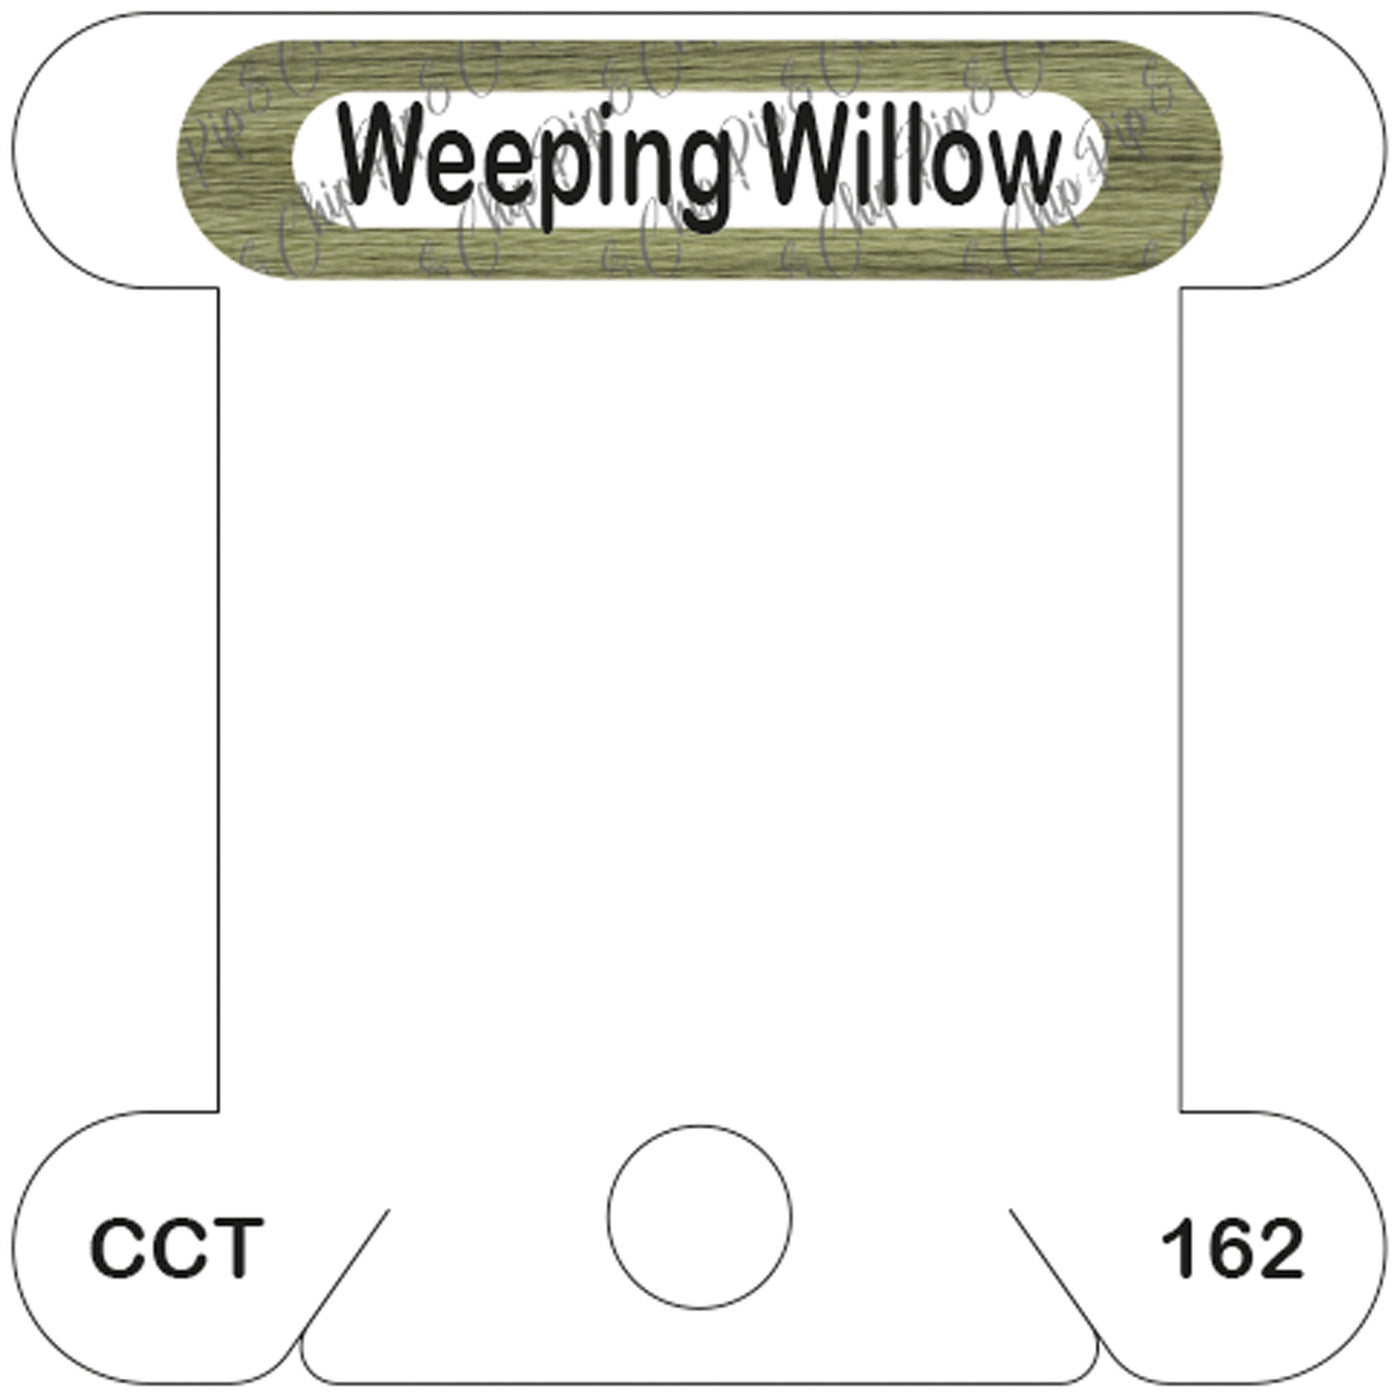 Classic Colorworks Weeping Willow acrylic bobbin